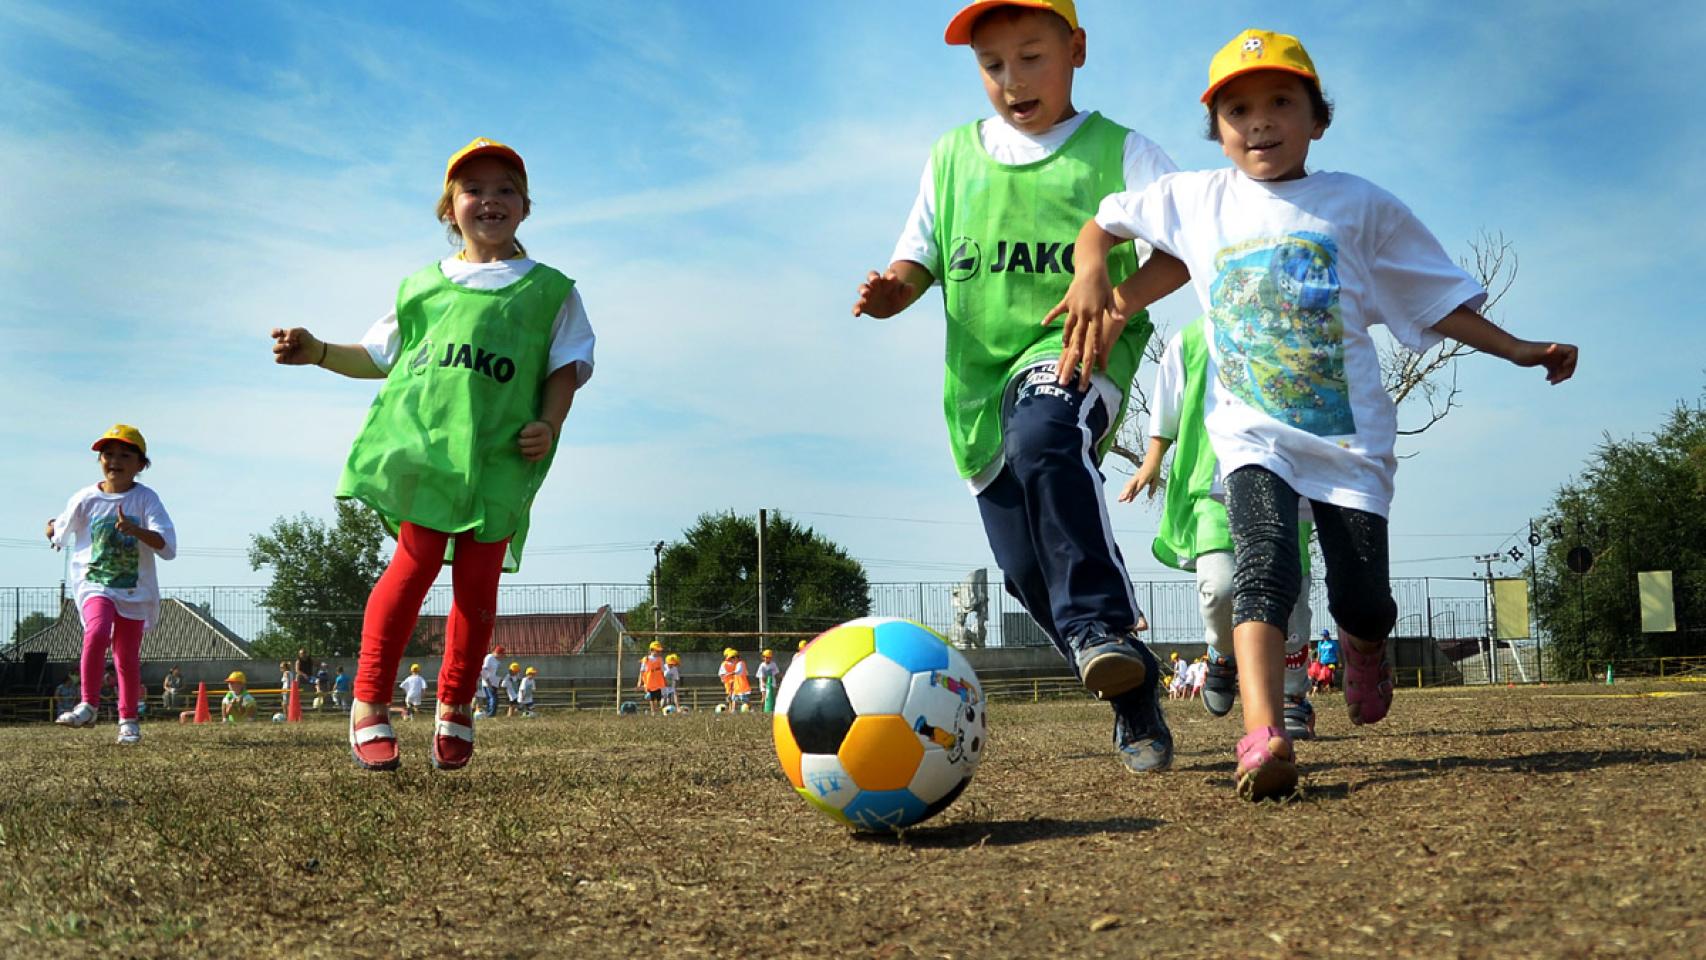 The football association of Moldova launches their child safeguarding policy